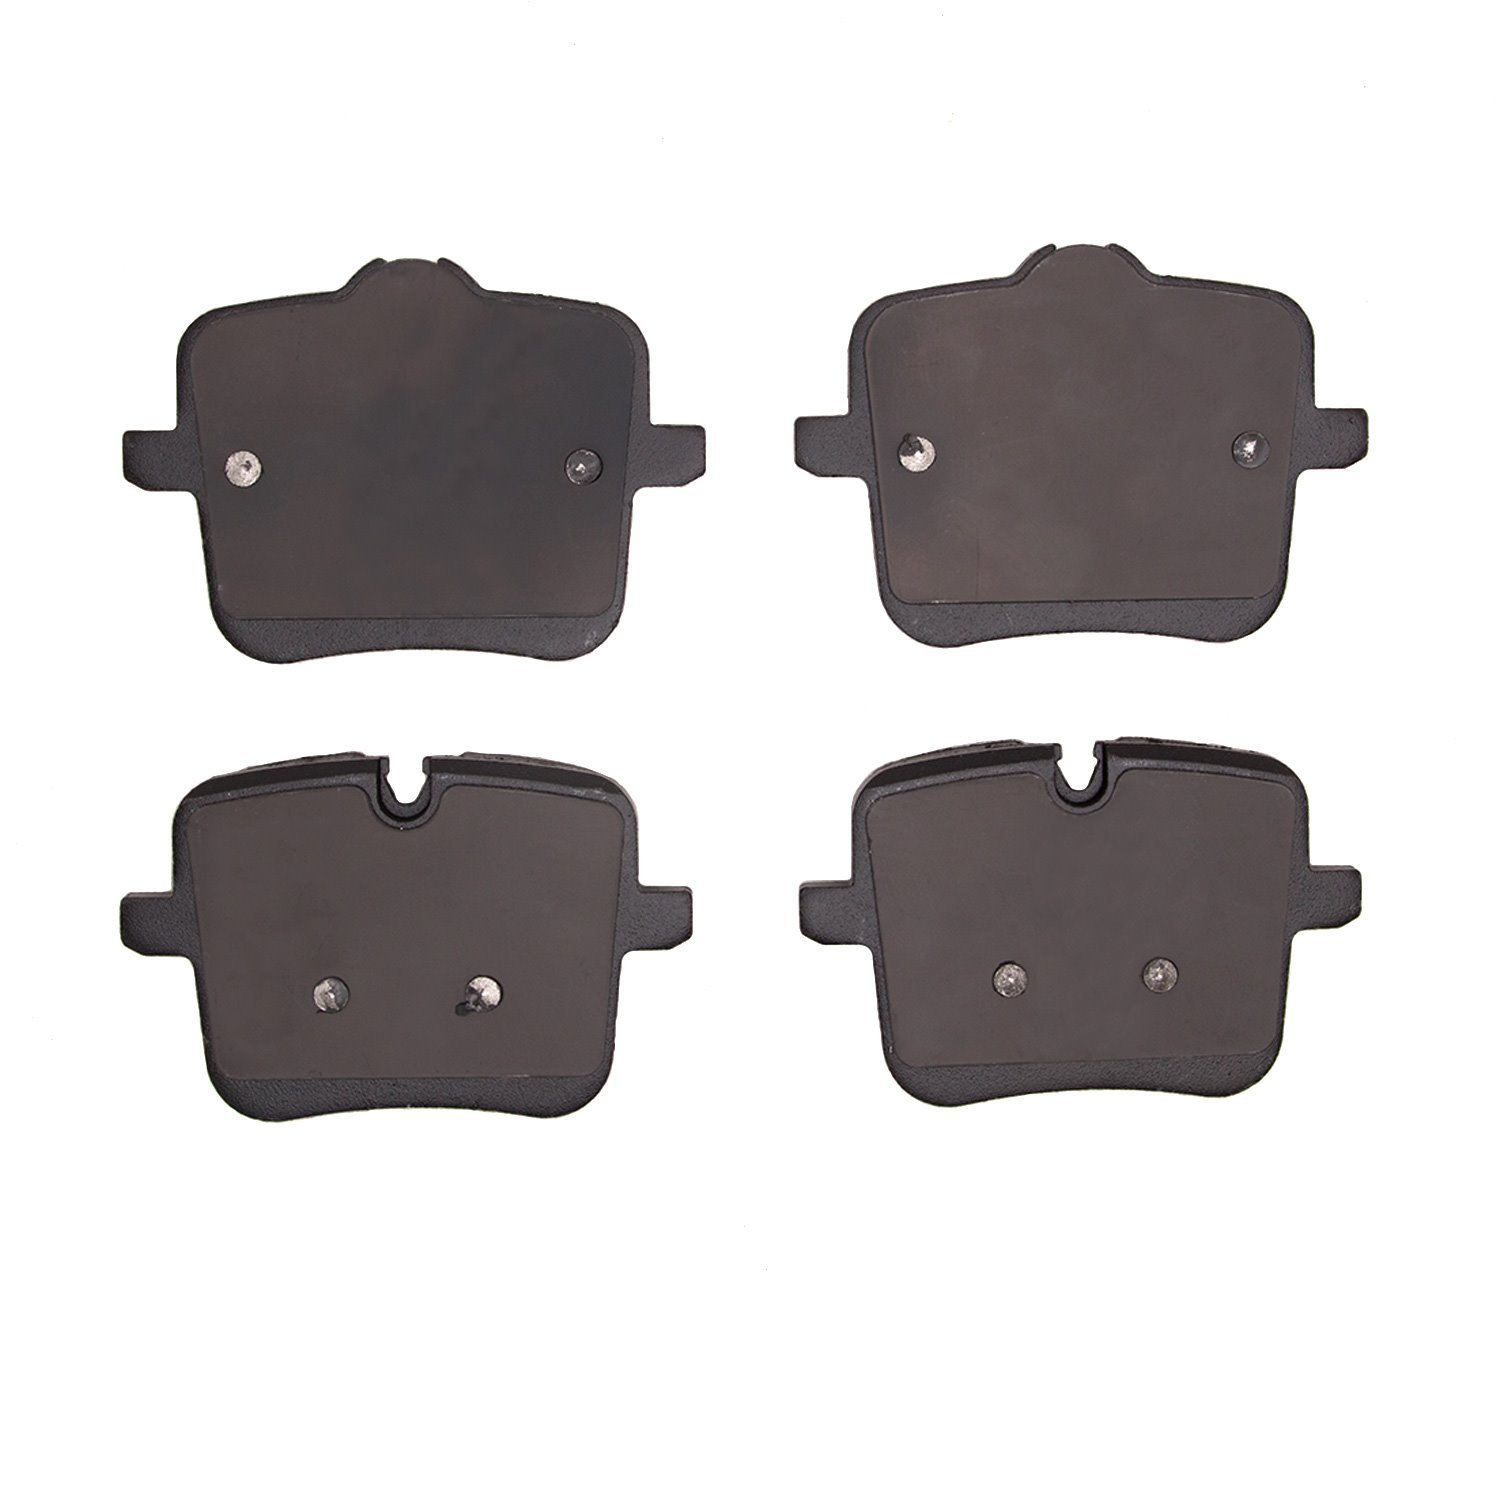 1551-2059-00 5000 Advanced Low-Metallic Brake Pads, Fits Select Multiple Makes/Models, Position: Rear